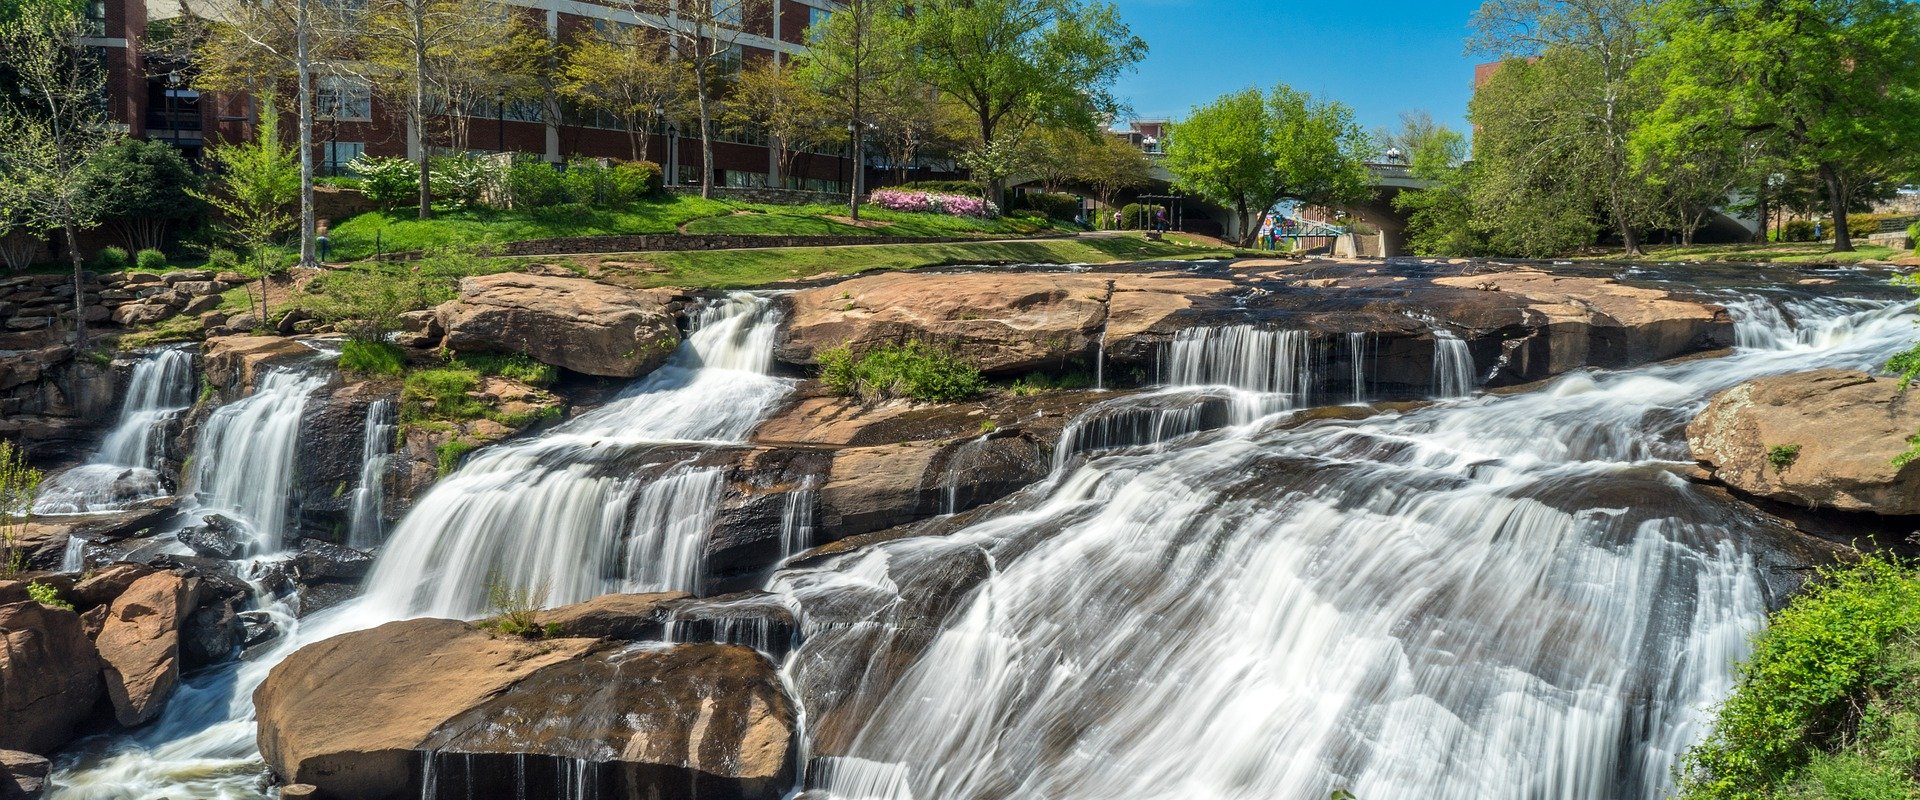 Fast Home Sales buys houses in Greenville South Carolina